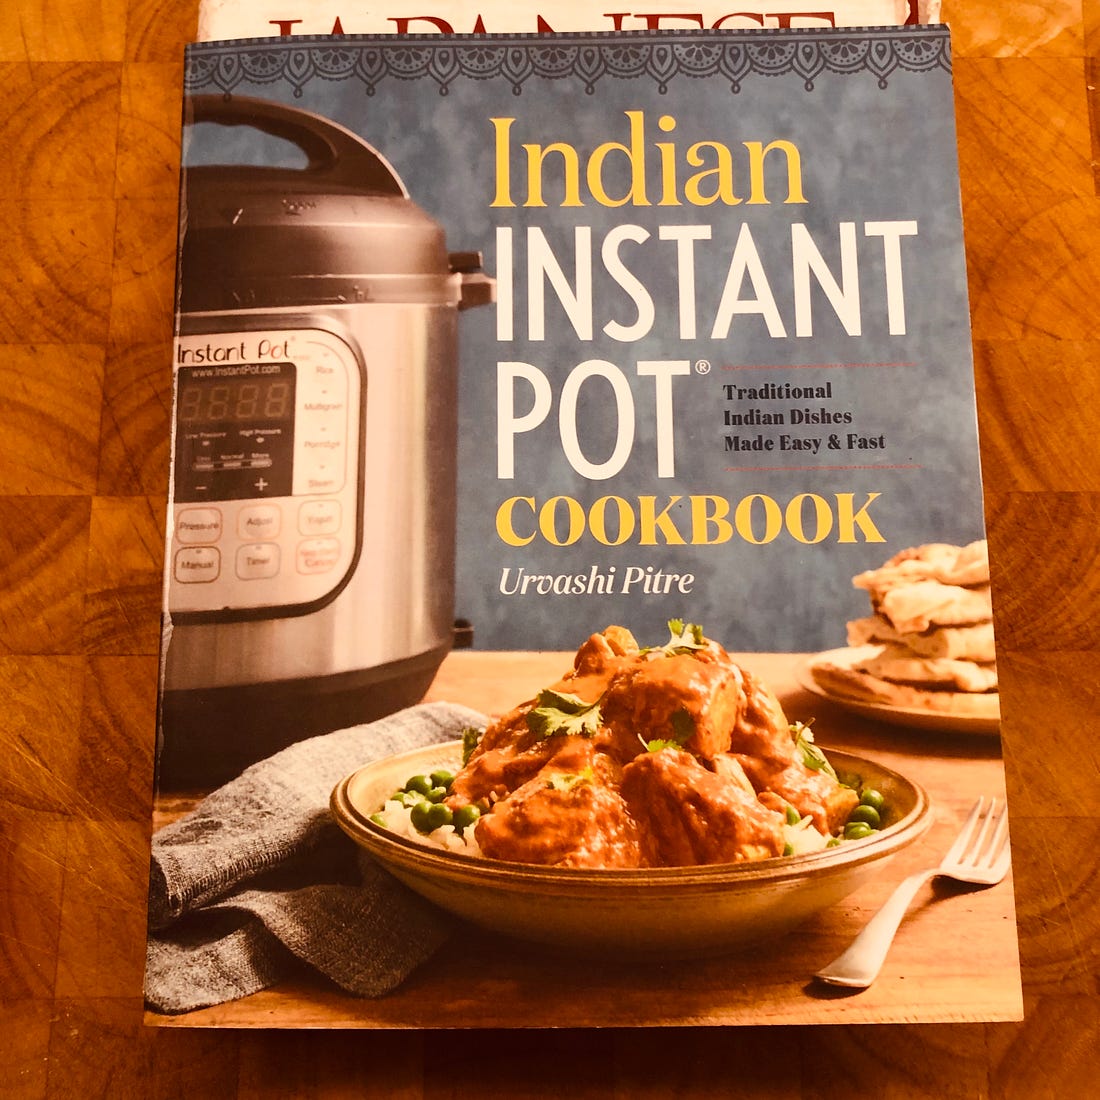 The cover of Indian Instant Pot Cookbook, showing an Instant Pot, some naan, and a bowl of curry